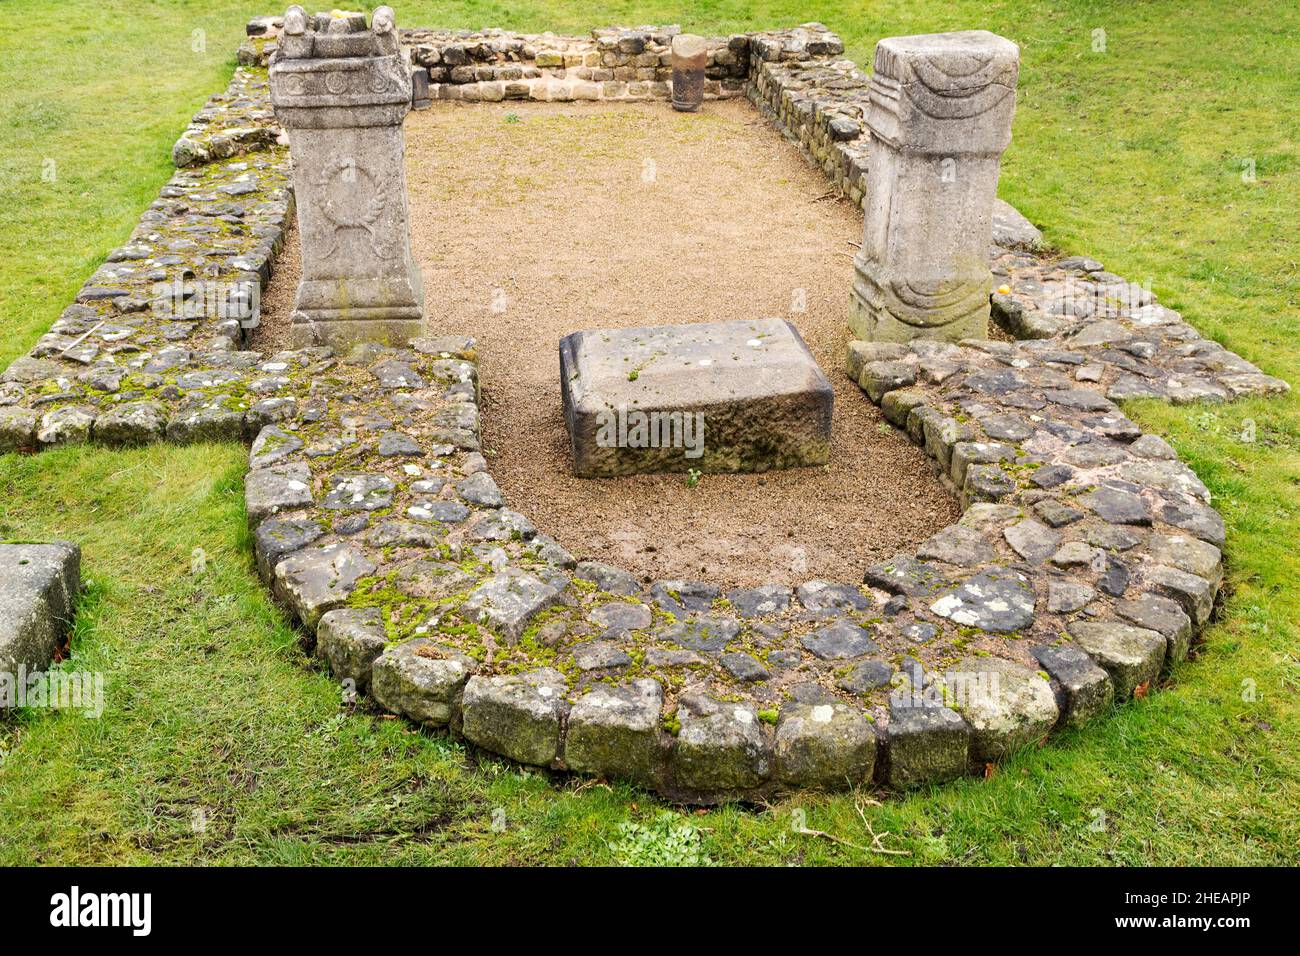 Benwell Roman Temple in the Benwell district of Newcastle upon Tyne, England. Stock Photo